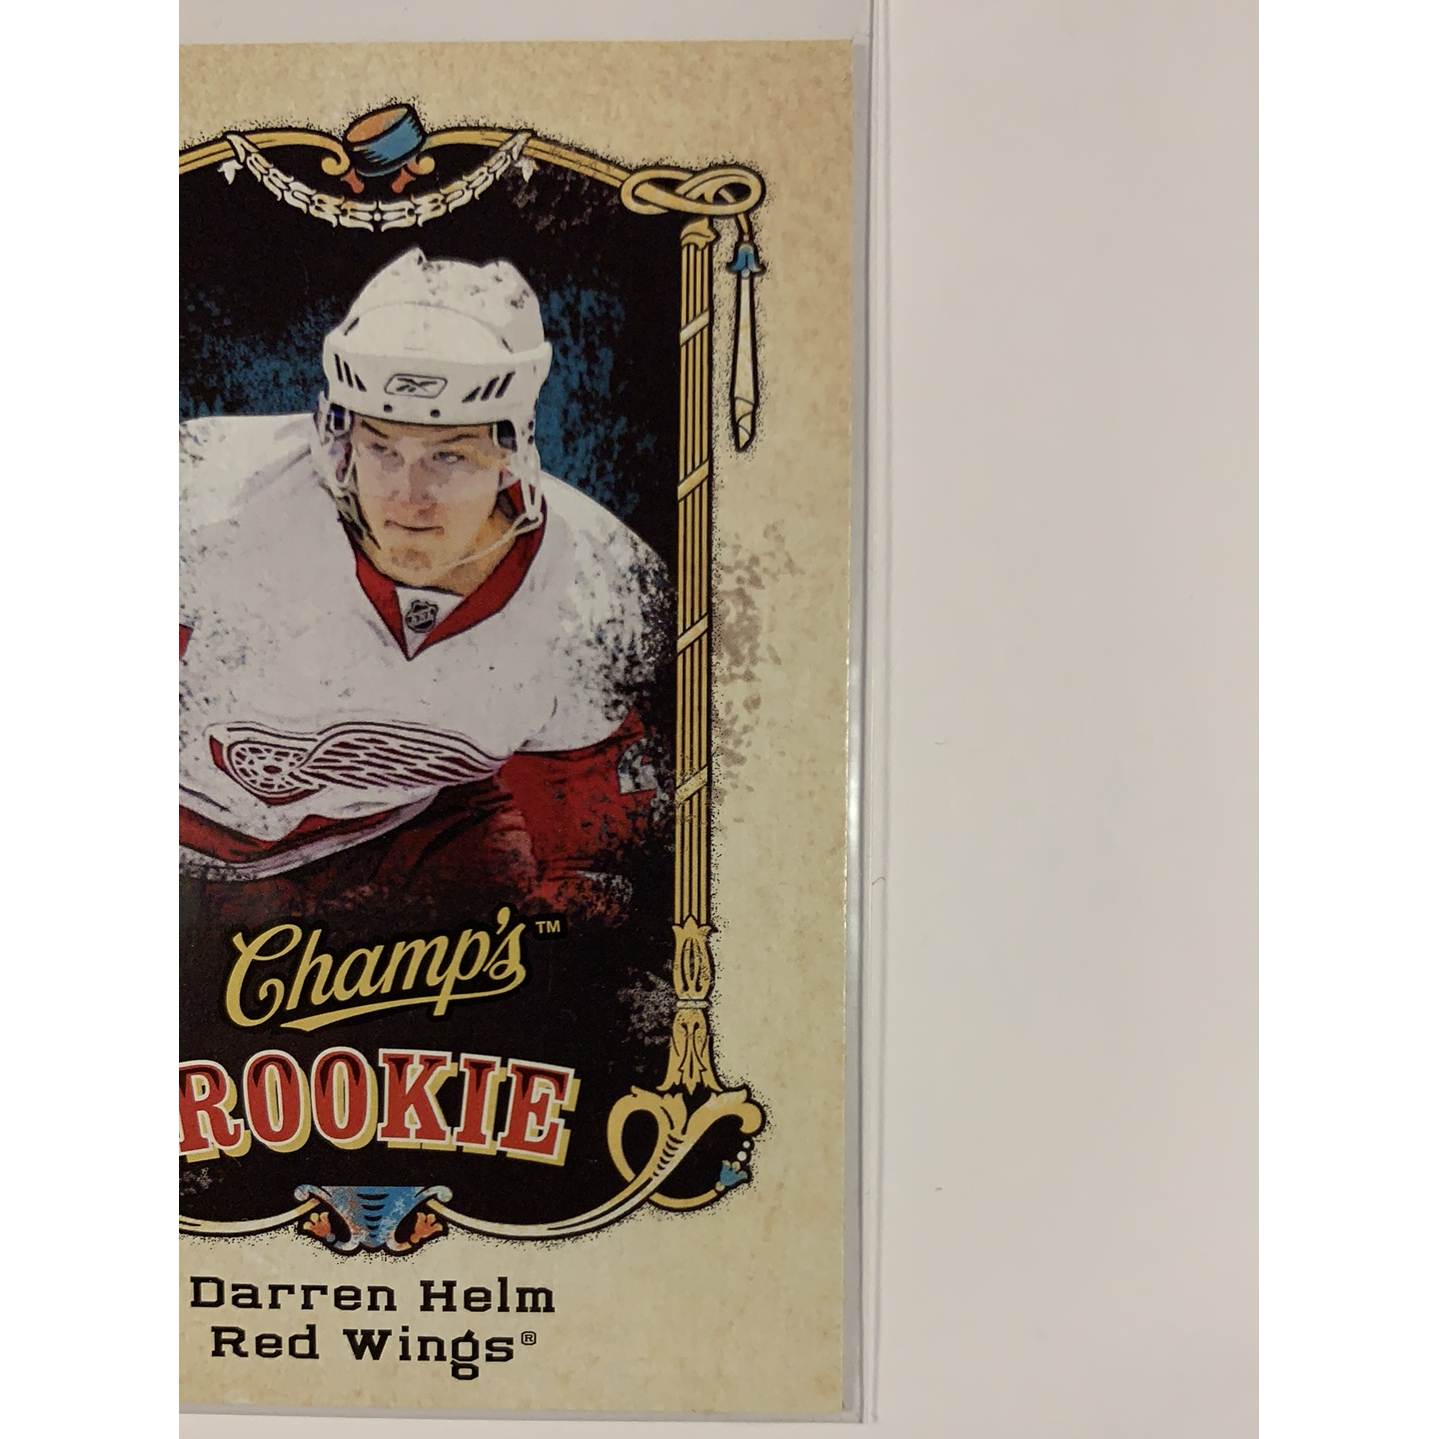  2008-09 Champs Darren Helm Rookie Card  Local Legends Cards & Collectibles